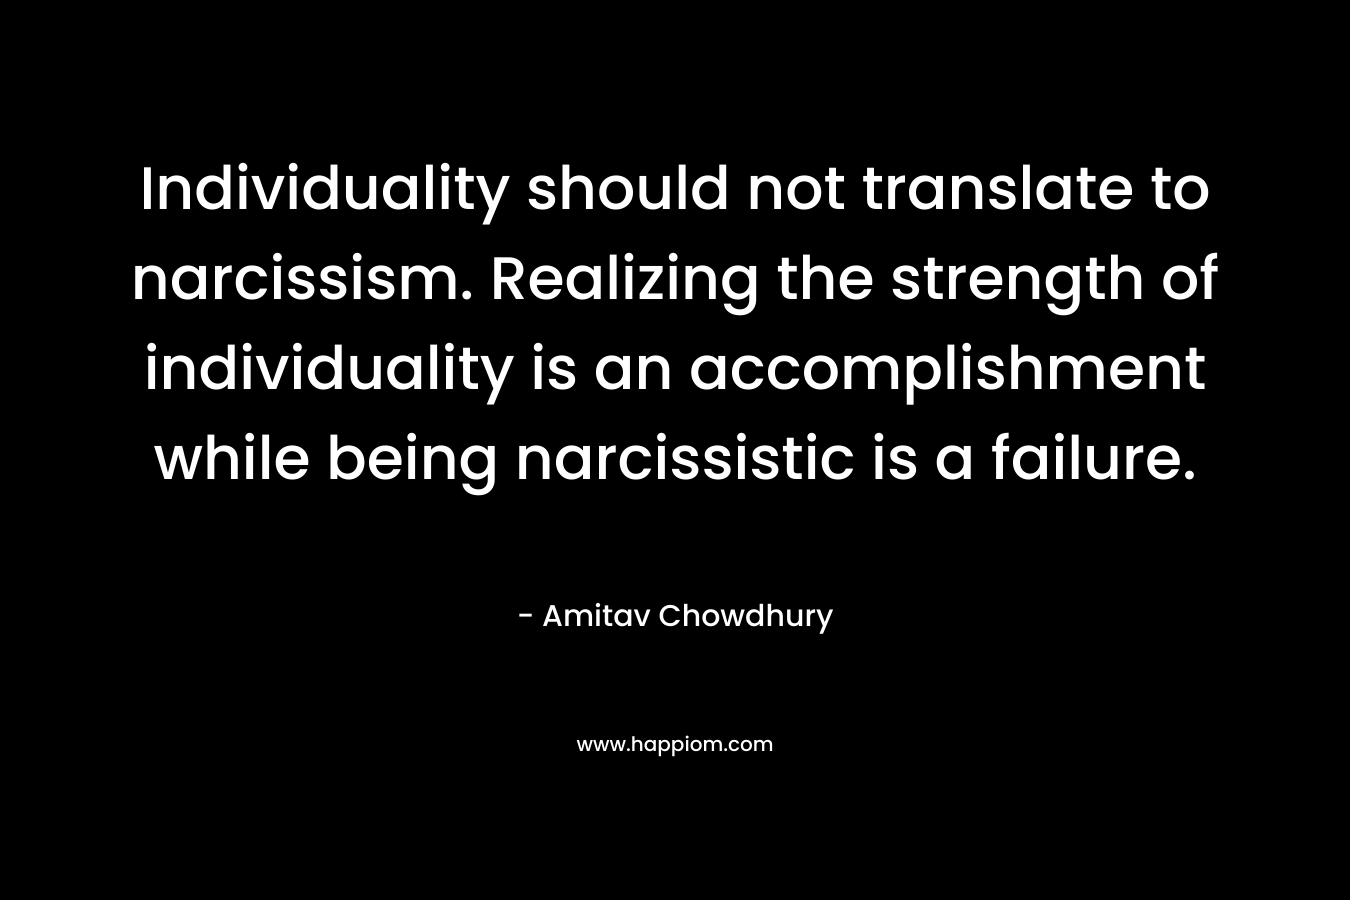 Individuality should not translate to narcissism. Realizing the strength of individuality is an accomplishment while being narcissistic is a failure.